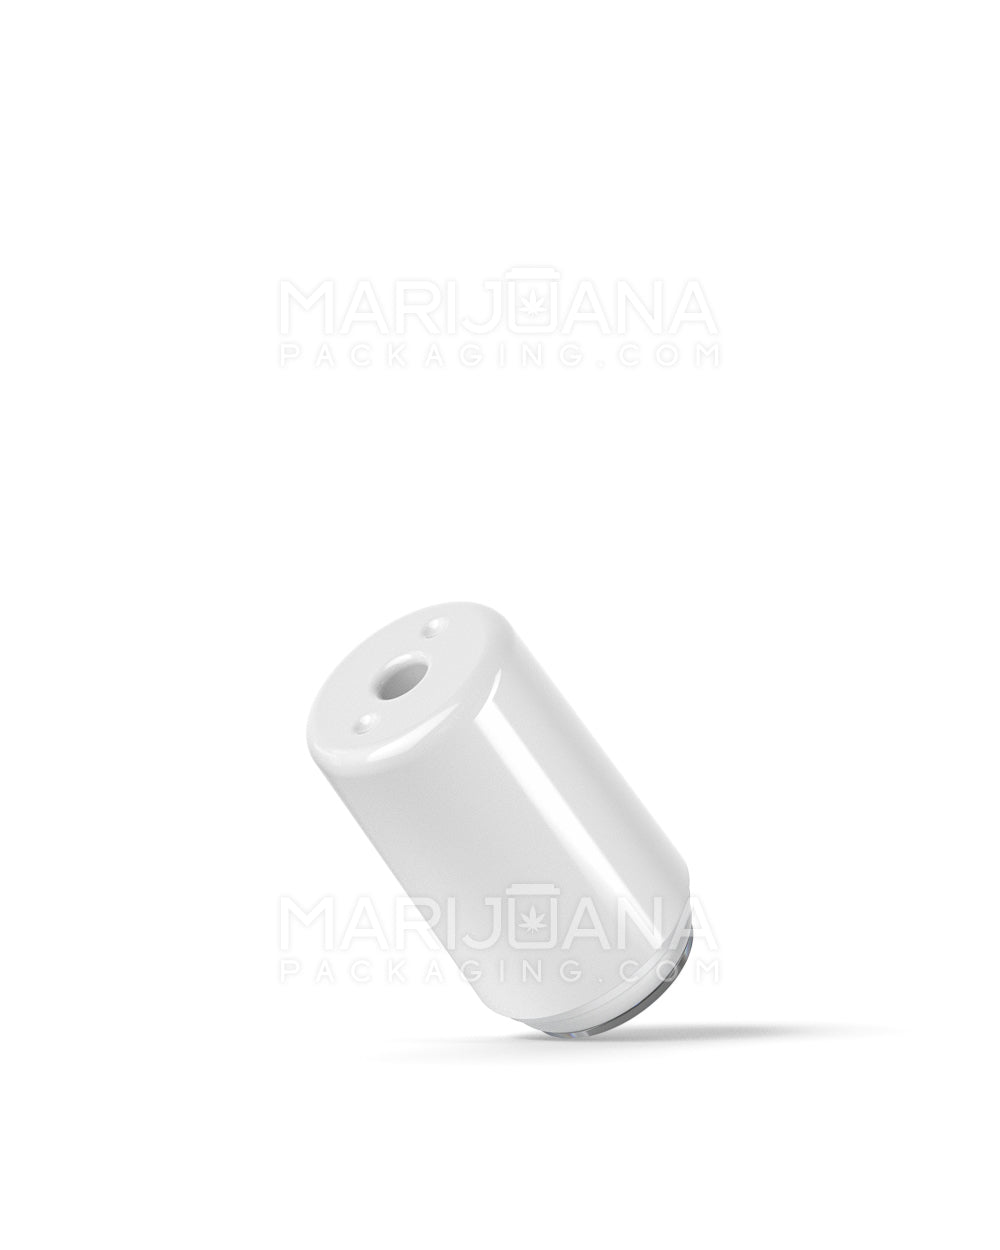 RAE | Round Vape Mouthpiece for Hand Press Plastic Cartridges | White Plastic - Hand Press - 400 Count - 4